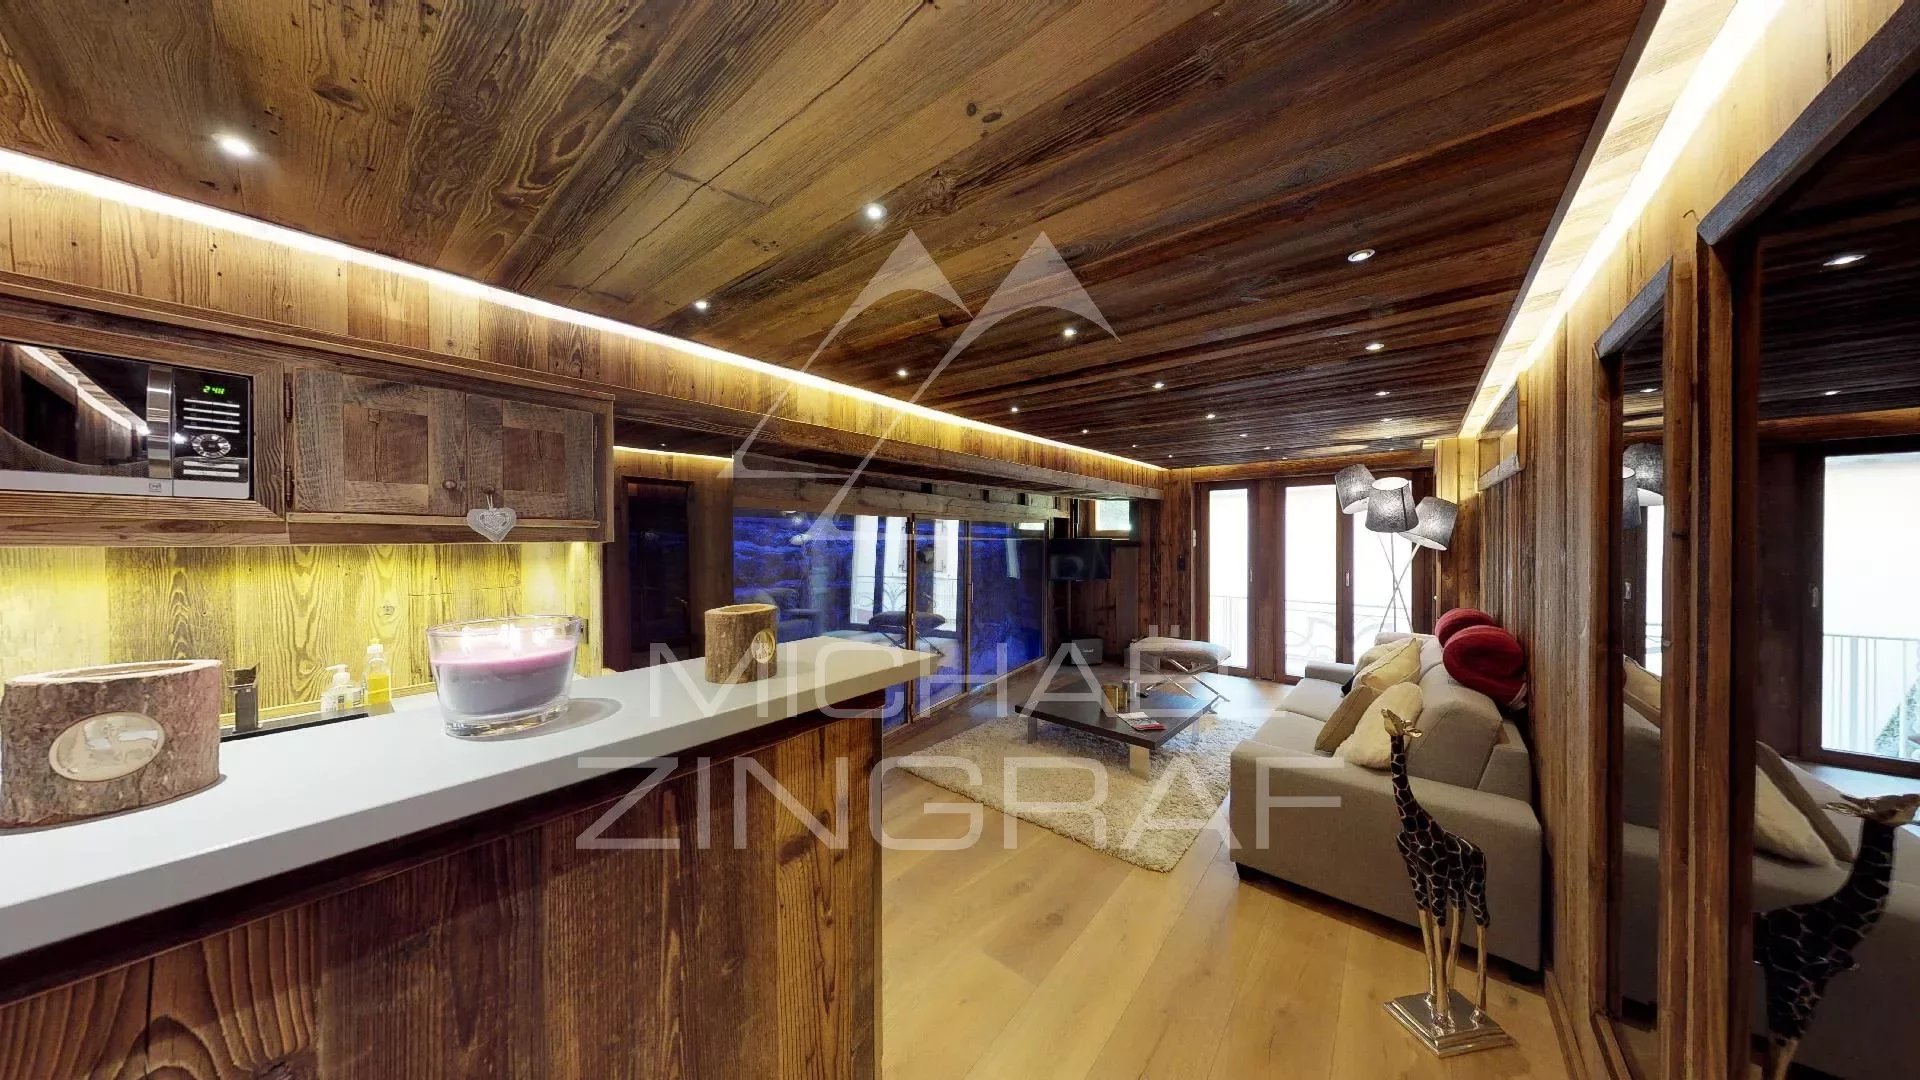 Renovated apartment, like a chalet, in the centre of Megève